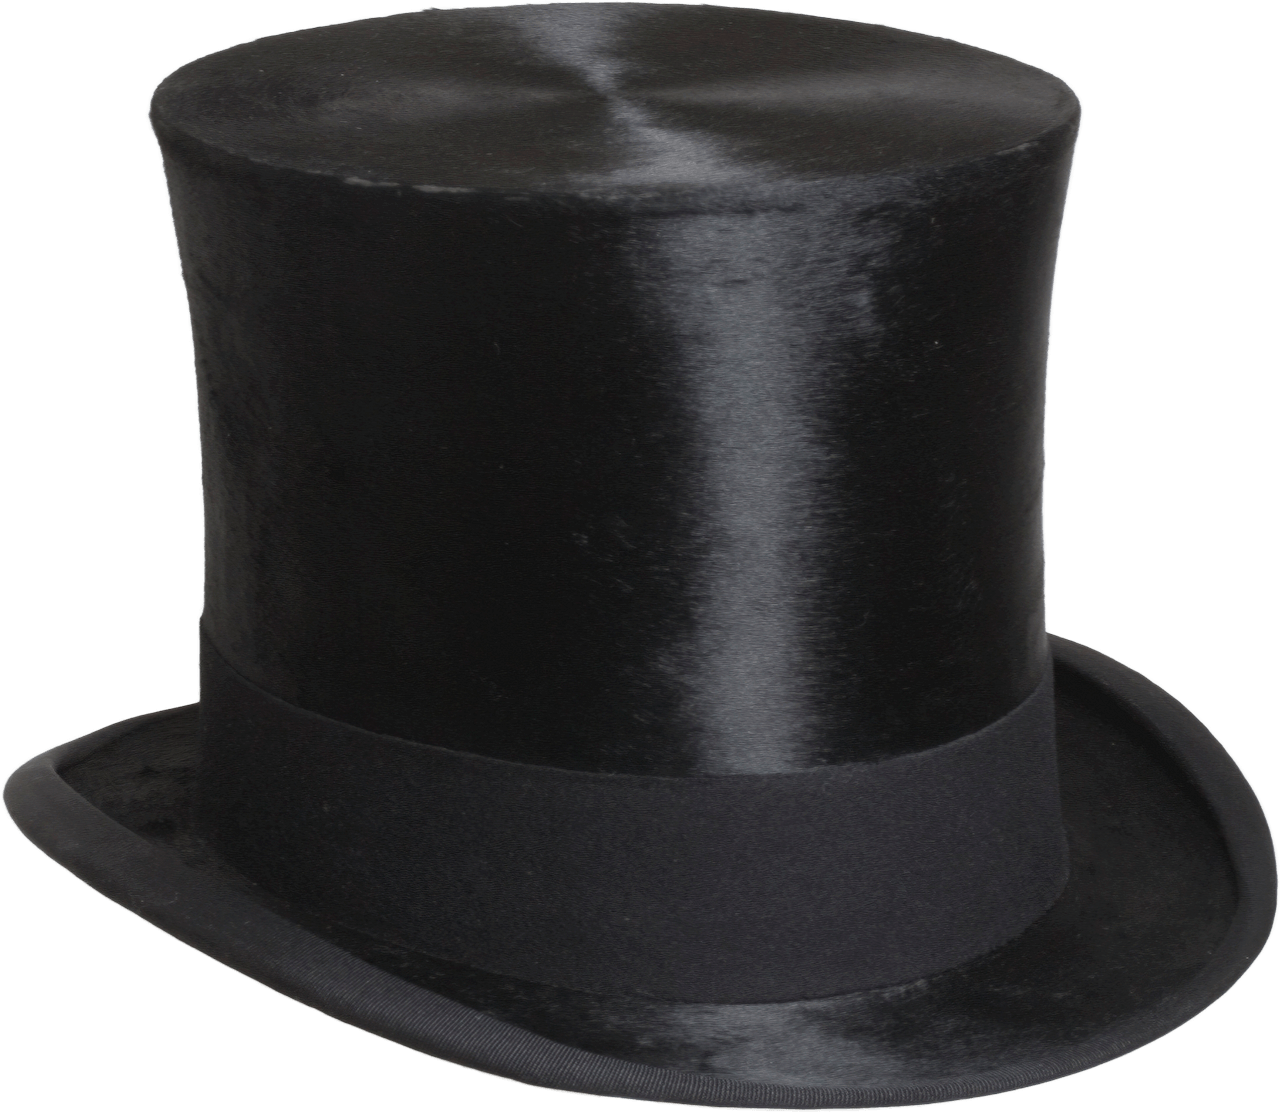 Finding Toxins in the Museum's Top Hats - HUE